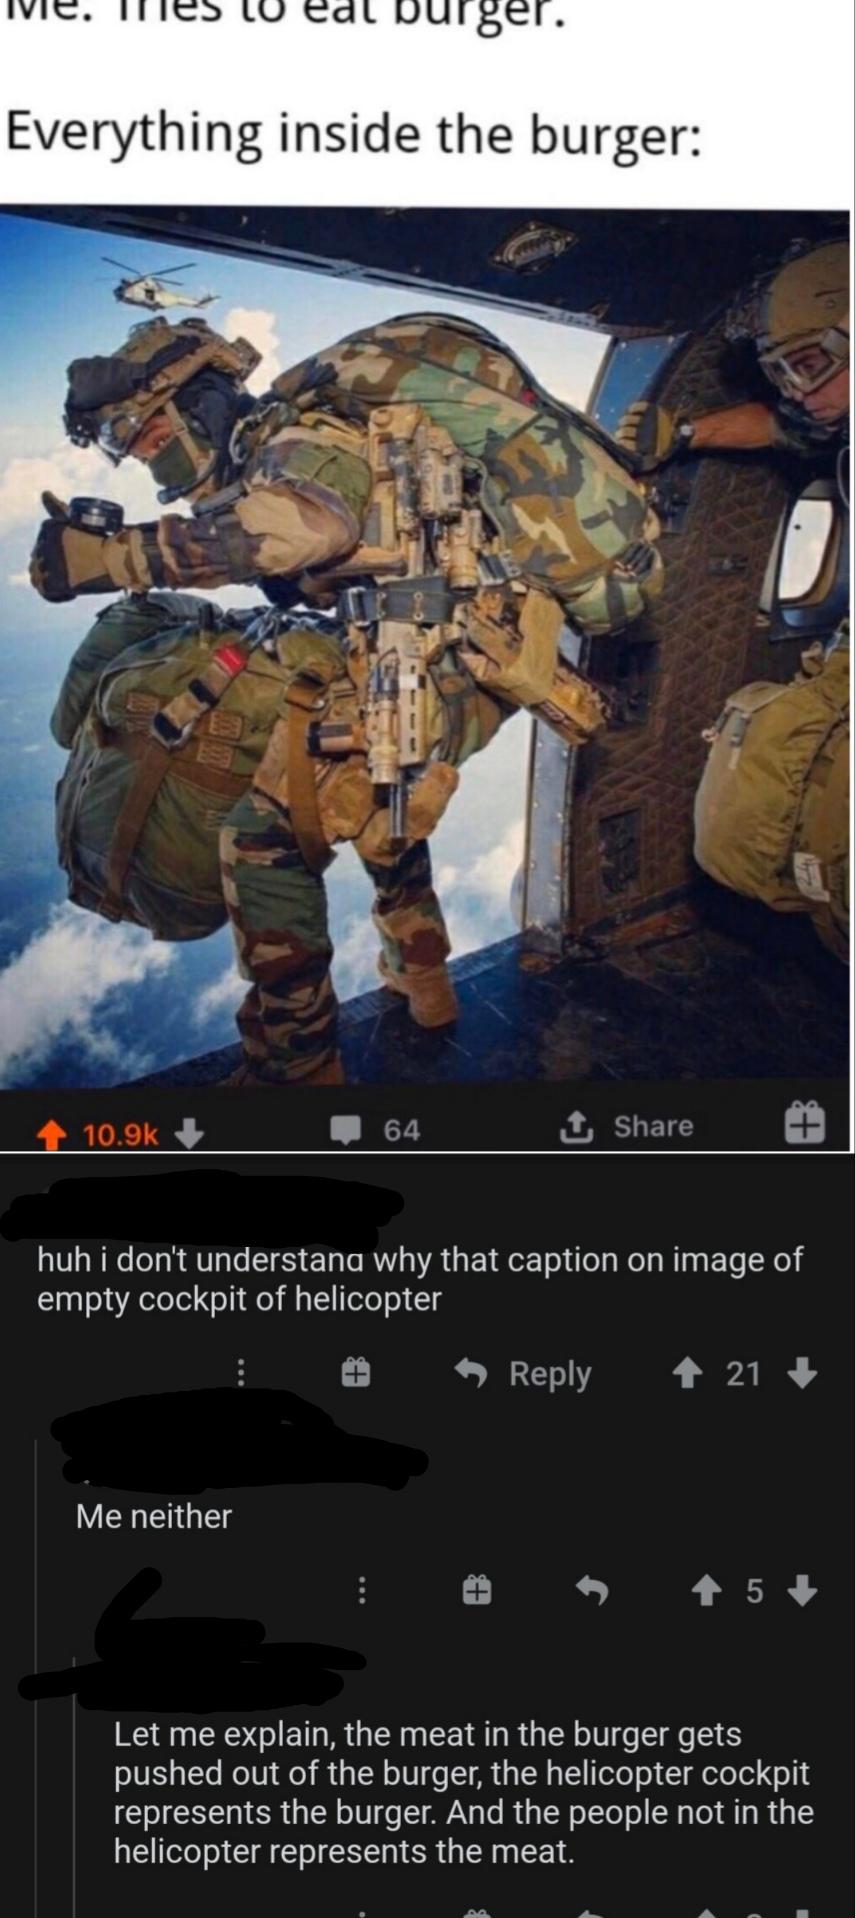 soldier - lu eat burger. Everything inside the burger 64 I huh i don't understand why that caption on image of empty cockpit of helicopter 21 Me neither 5 Let me explain, the meat in the burger gets pushed out of the burger, the helicopter cockpit represe